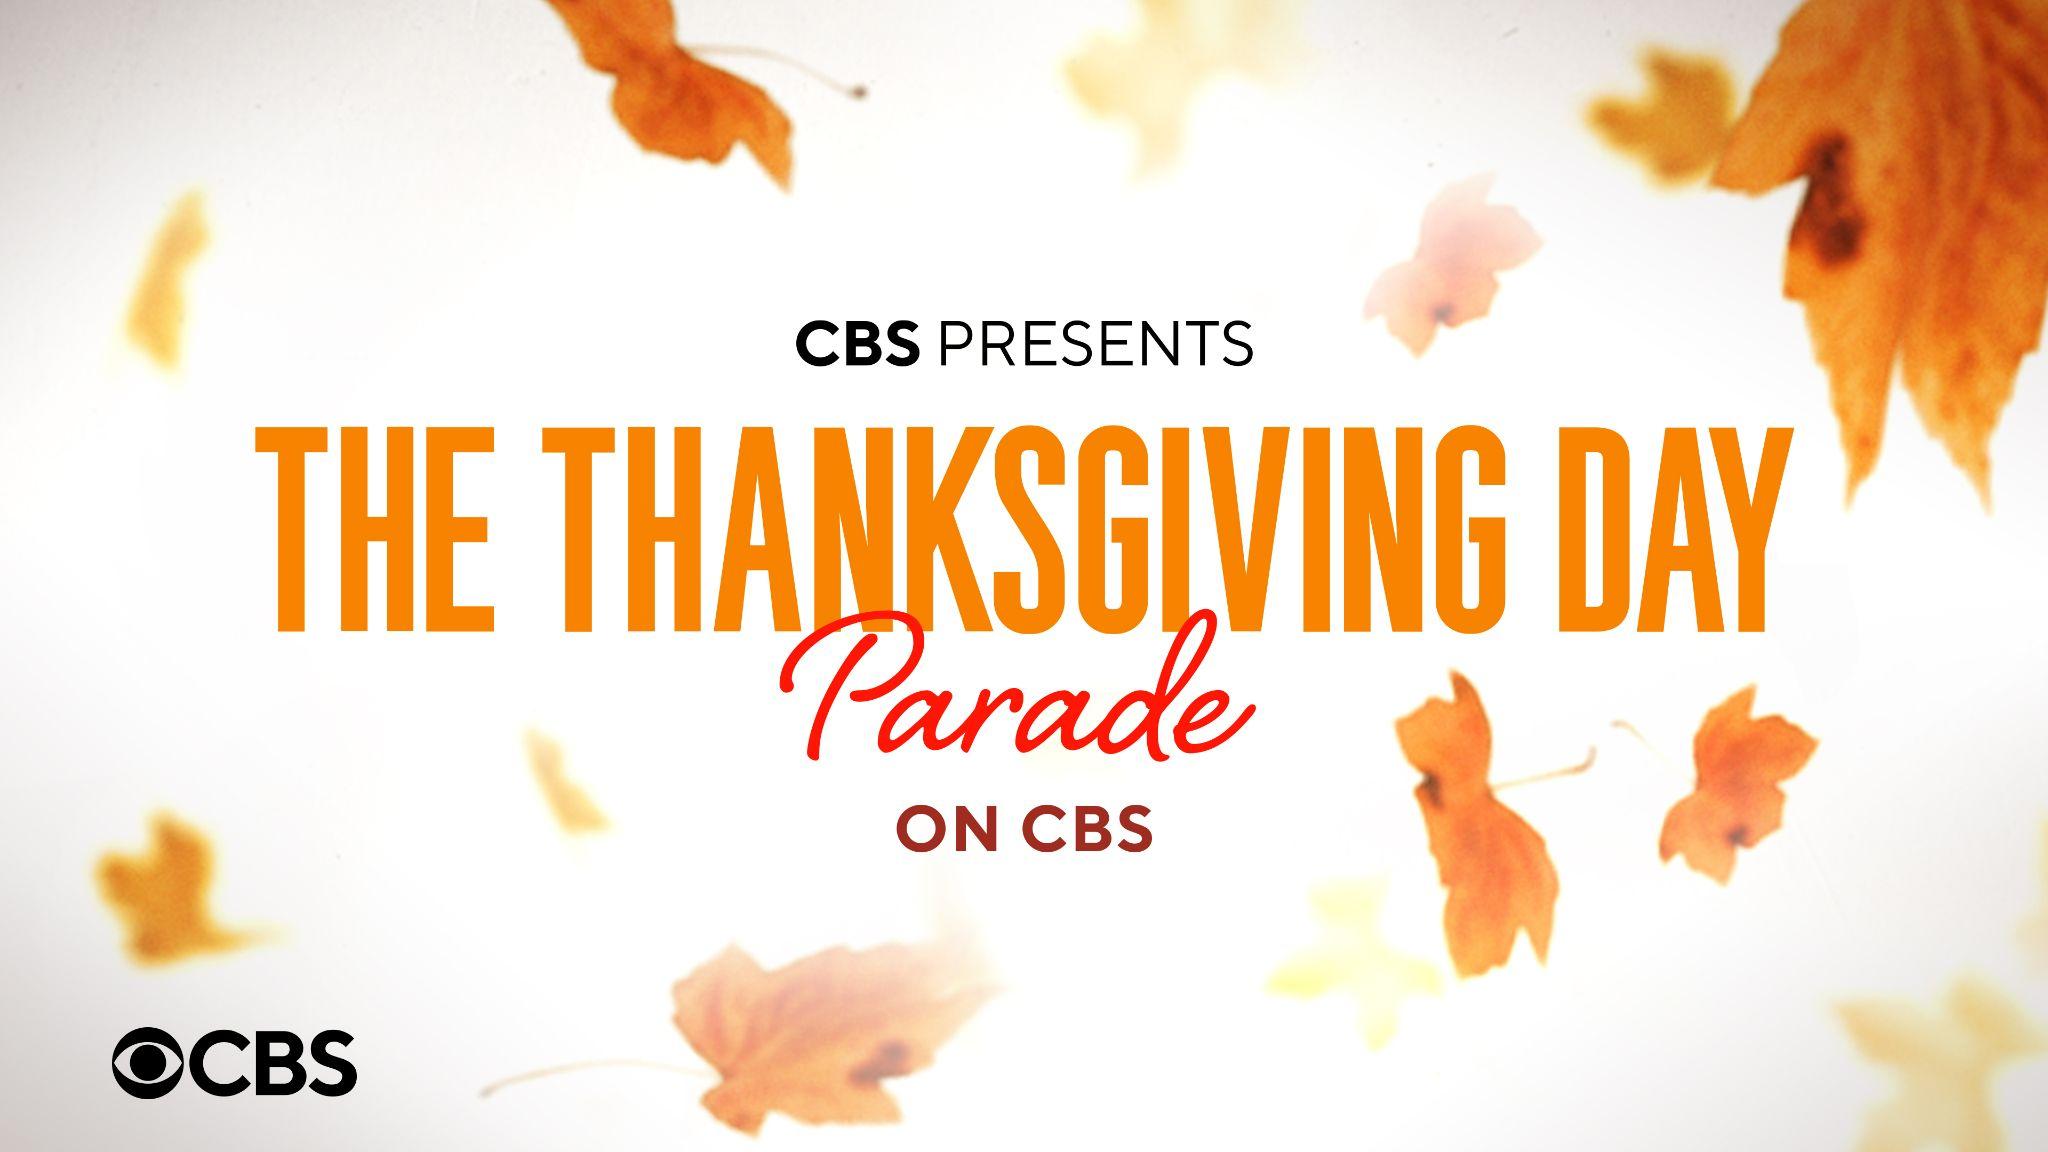 Paramount Press Express “THE THANKSGIVING DAY PARADE ON CBS